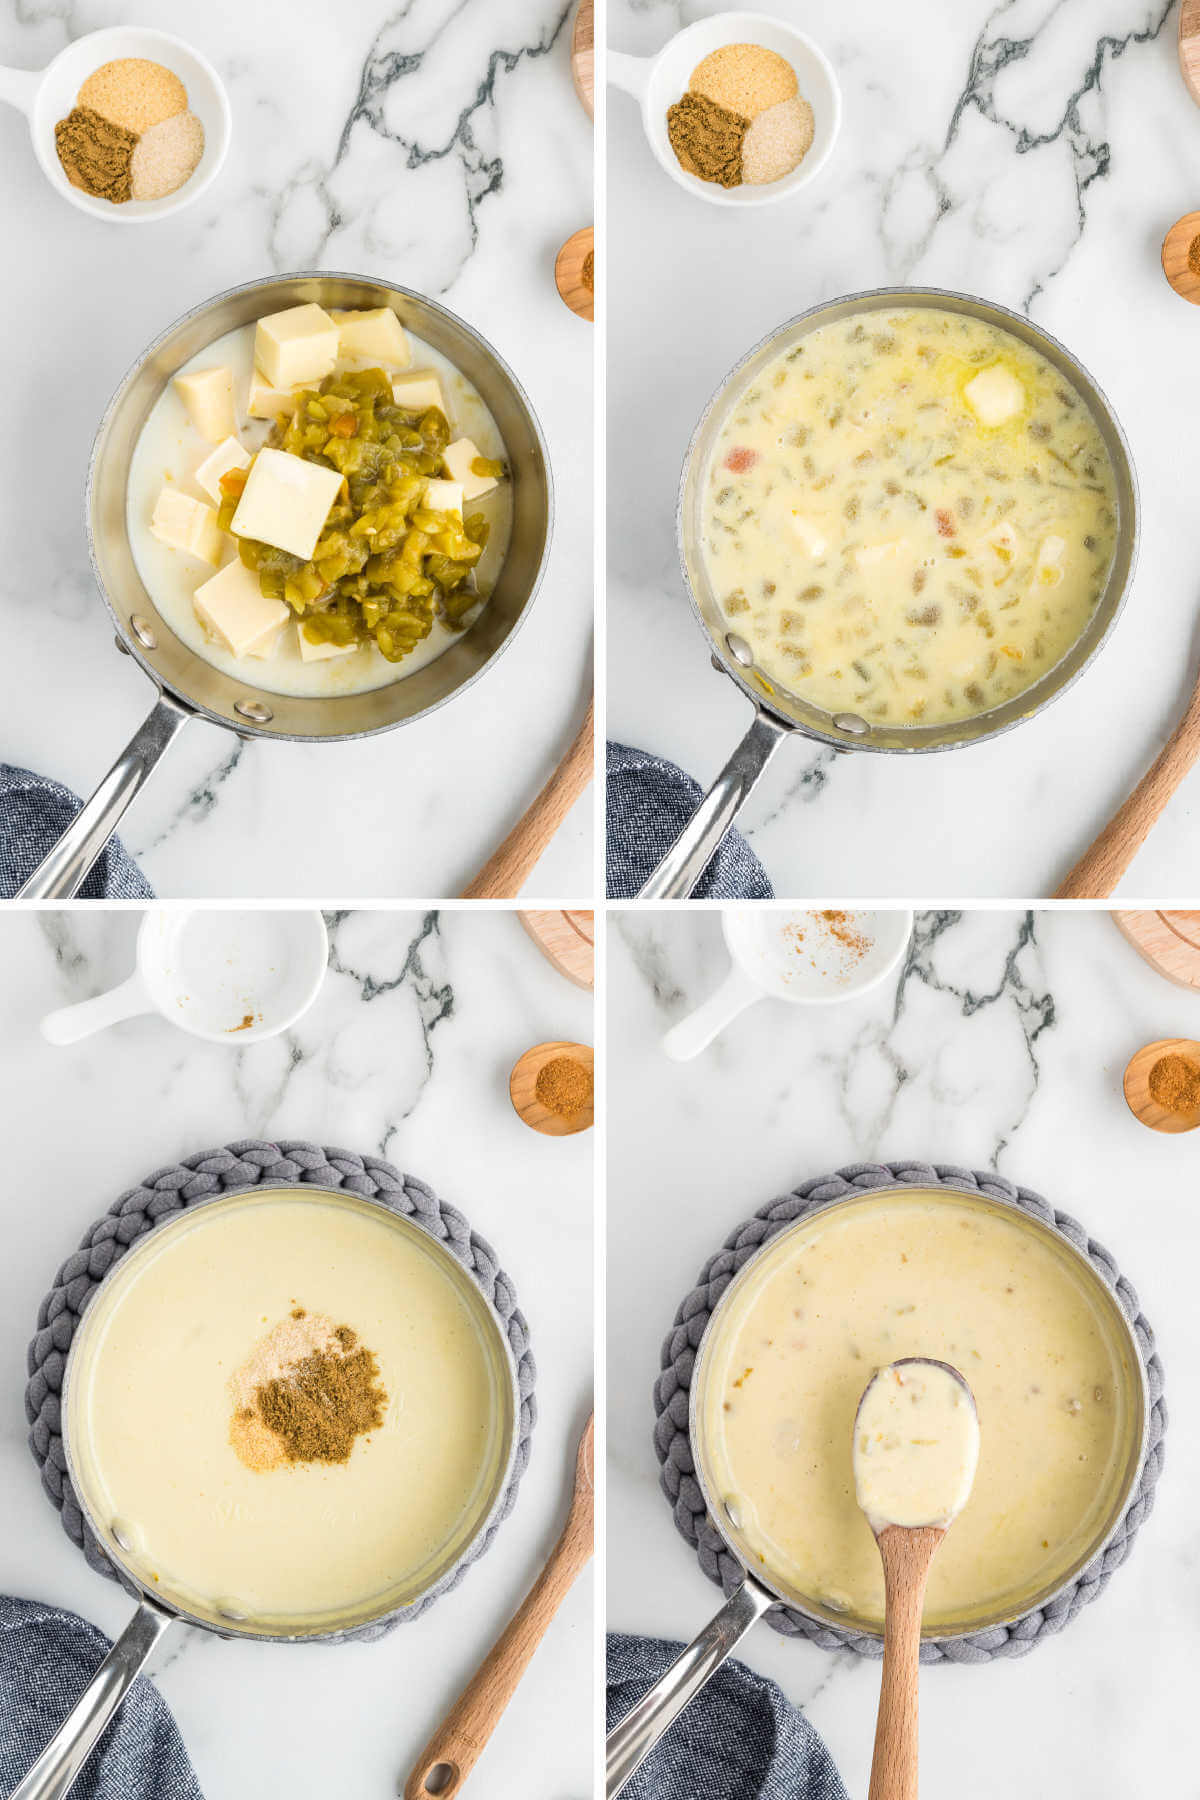 process steps for making white queso dip; melting cheese and adding spices.